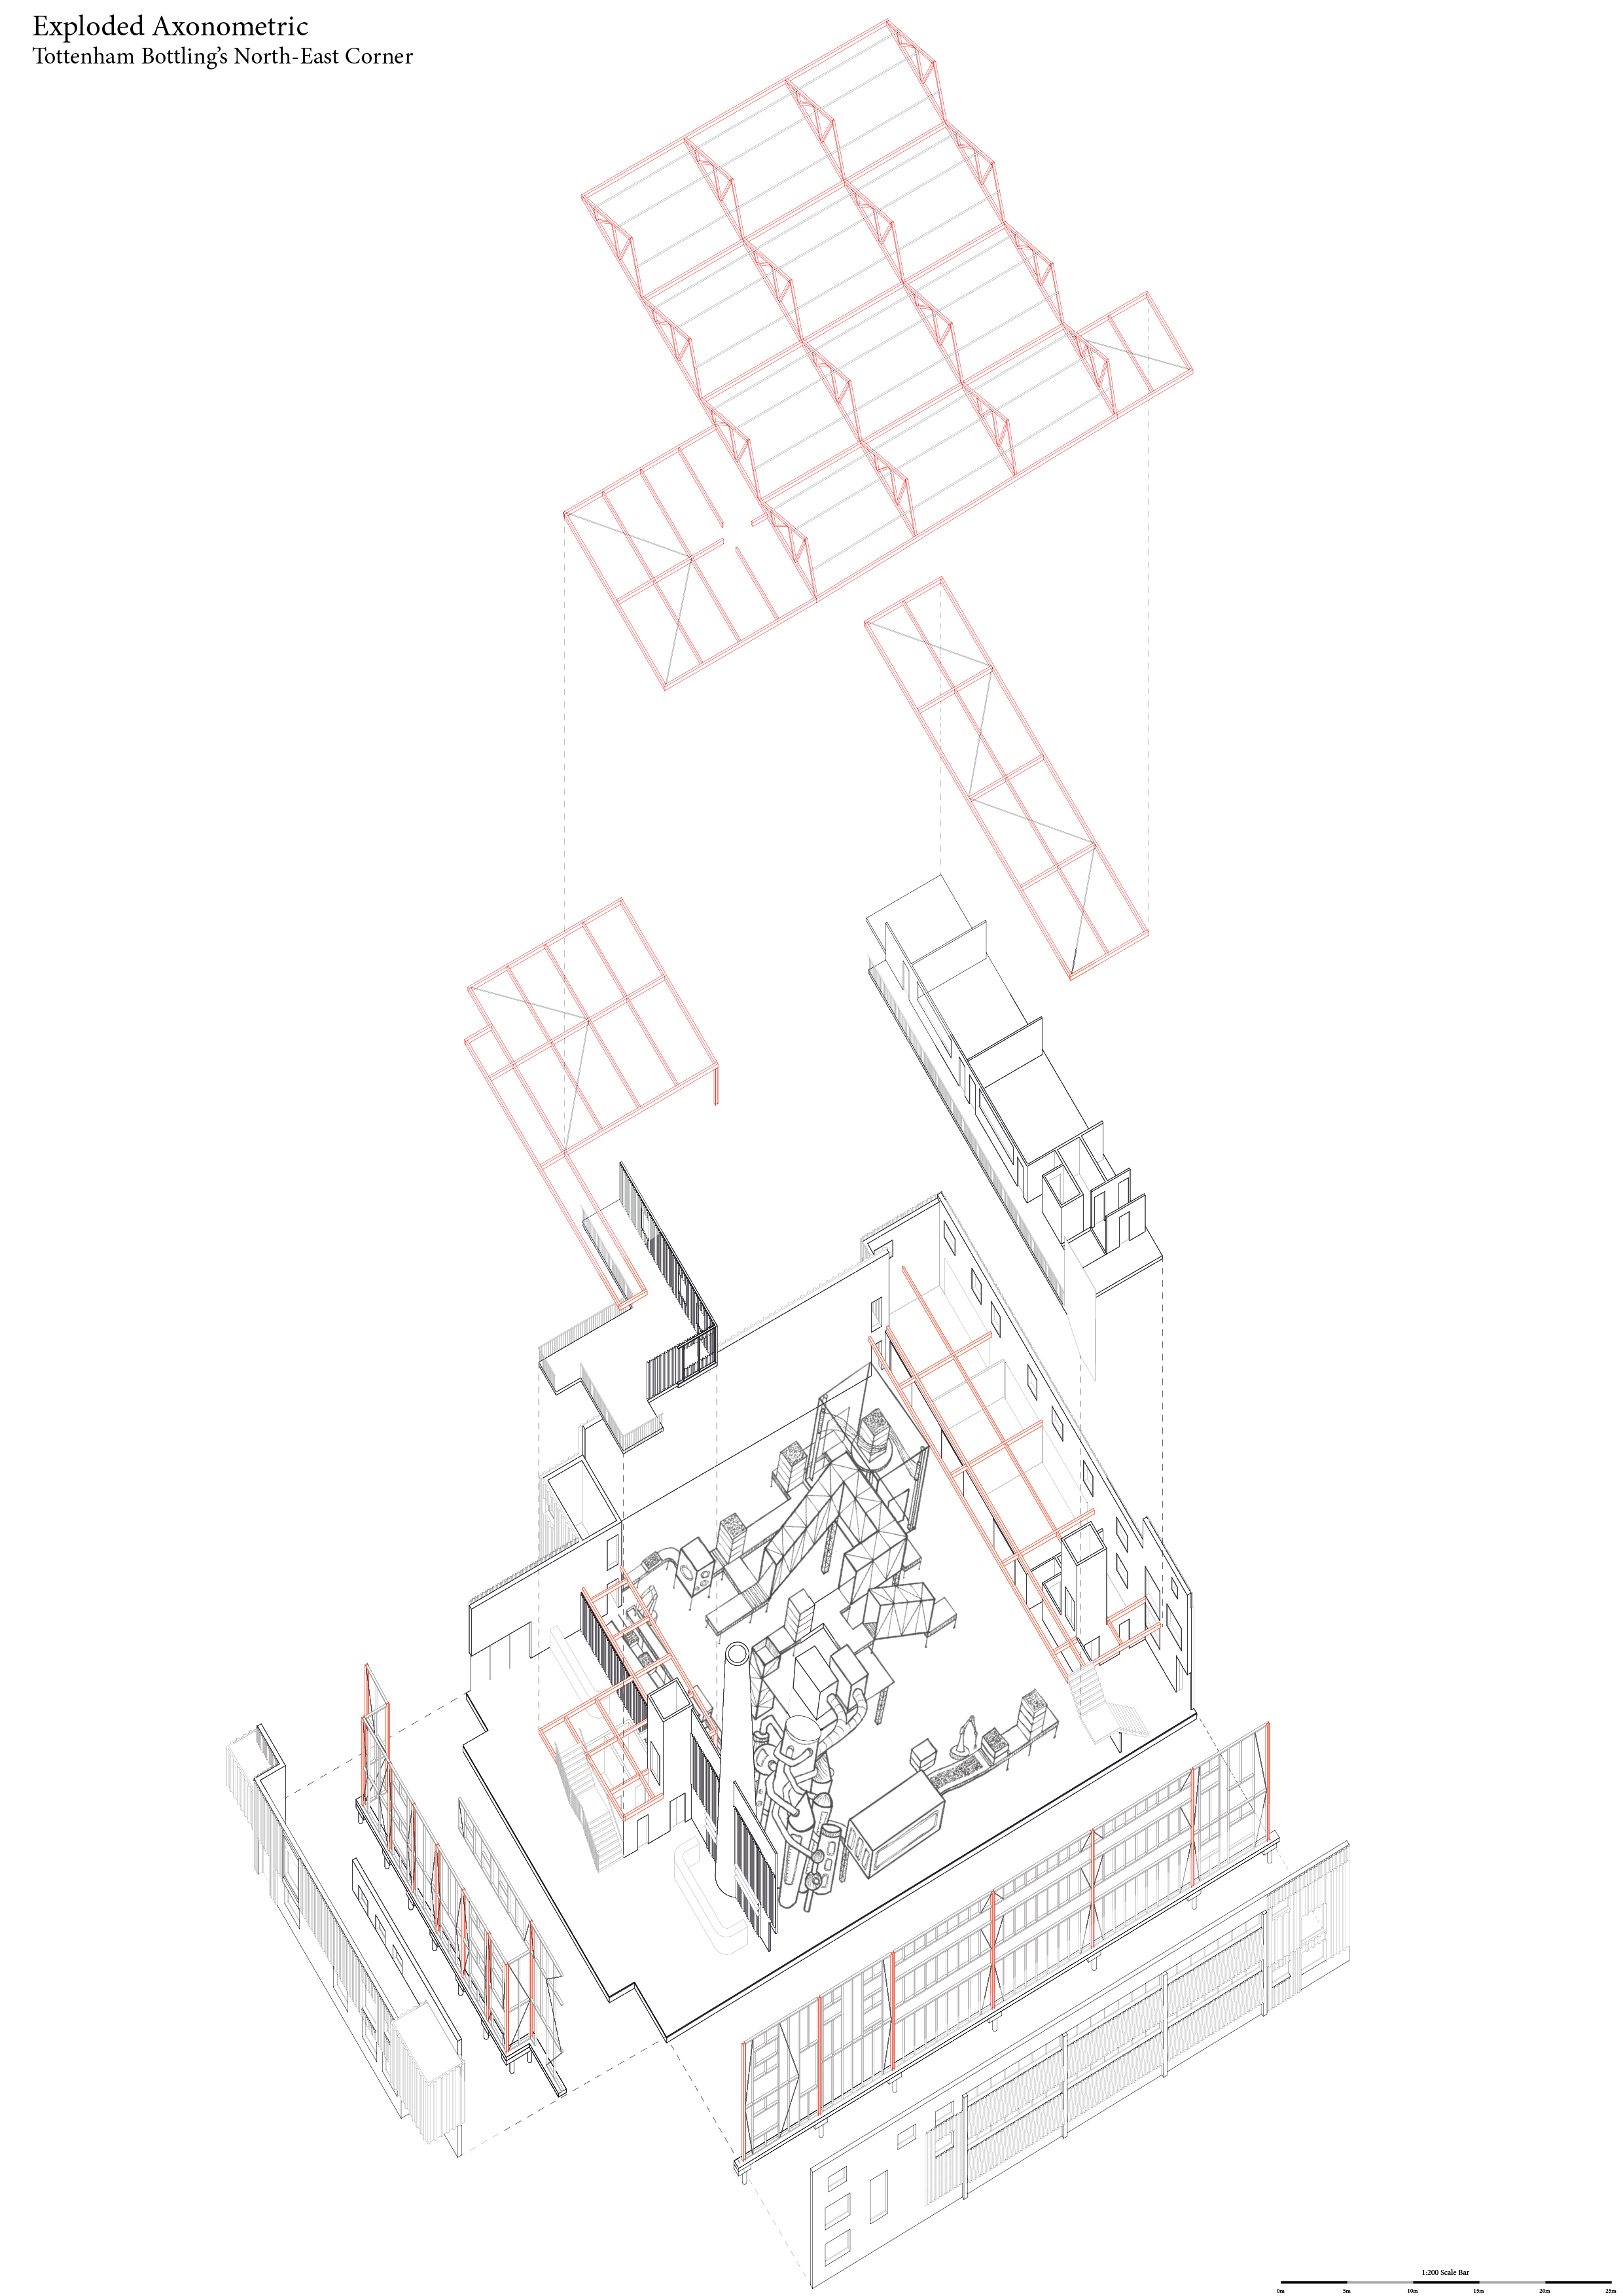 exploded axonometric of the bottling unit. the machinery is displayed in the centre with the roofs exploded from it as well as the facades exploded from the central manufacturing space